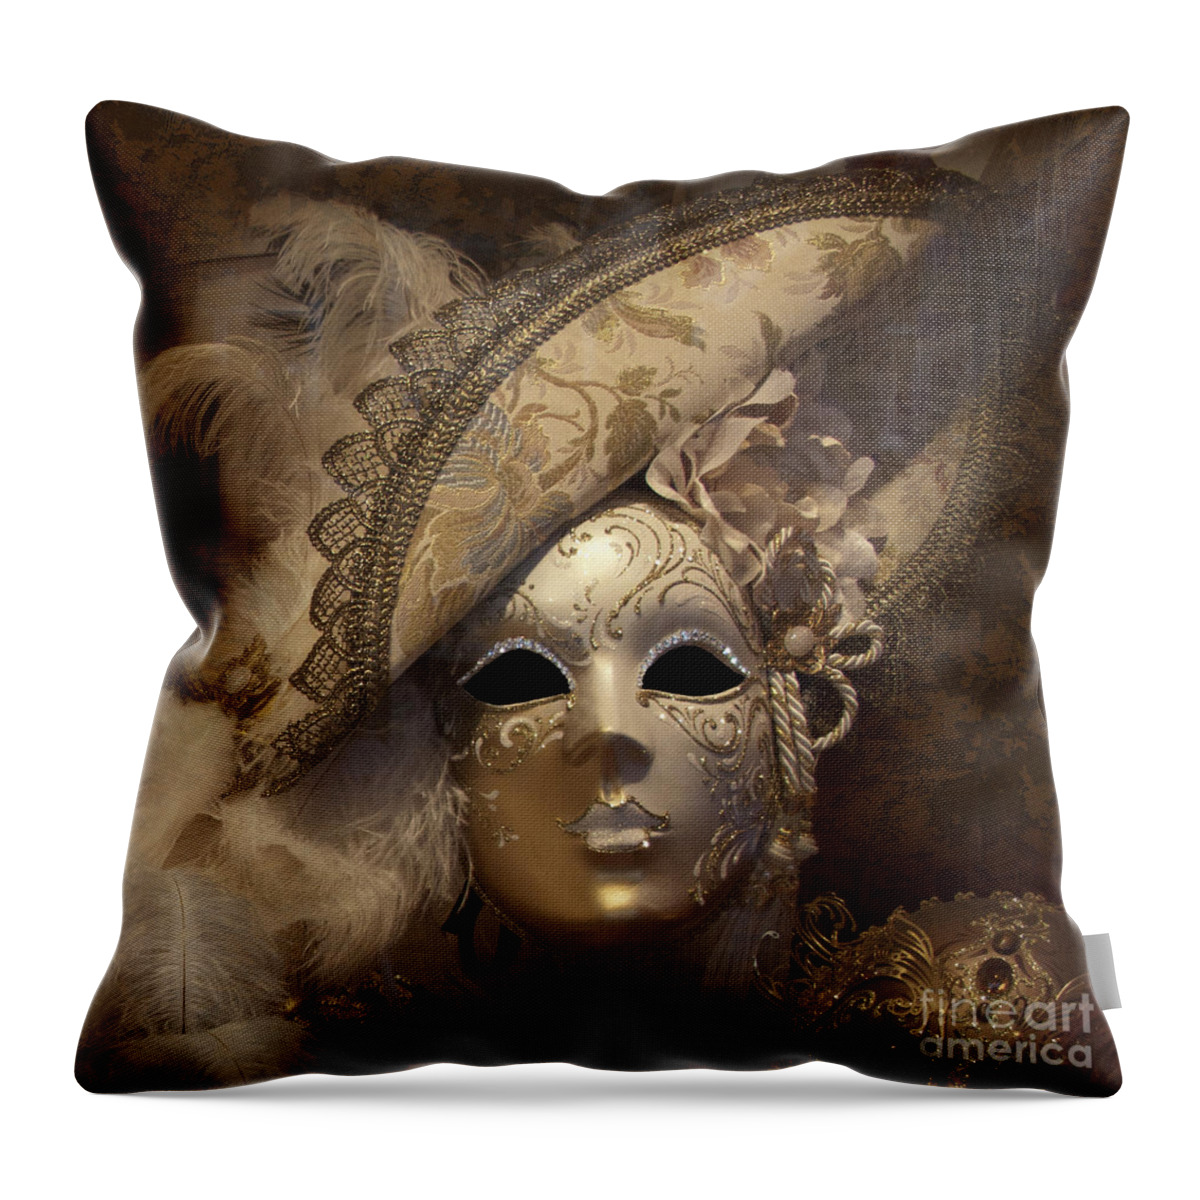 Mask Throw Pillow featuring the photograph Venetian Face Mask F by Heiko Koehrer-Wagner